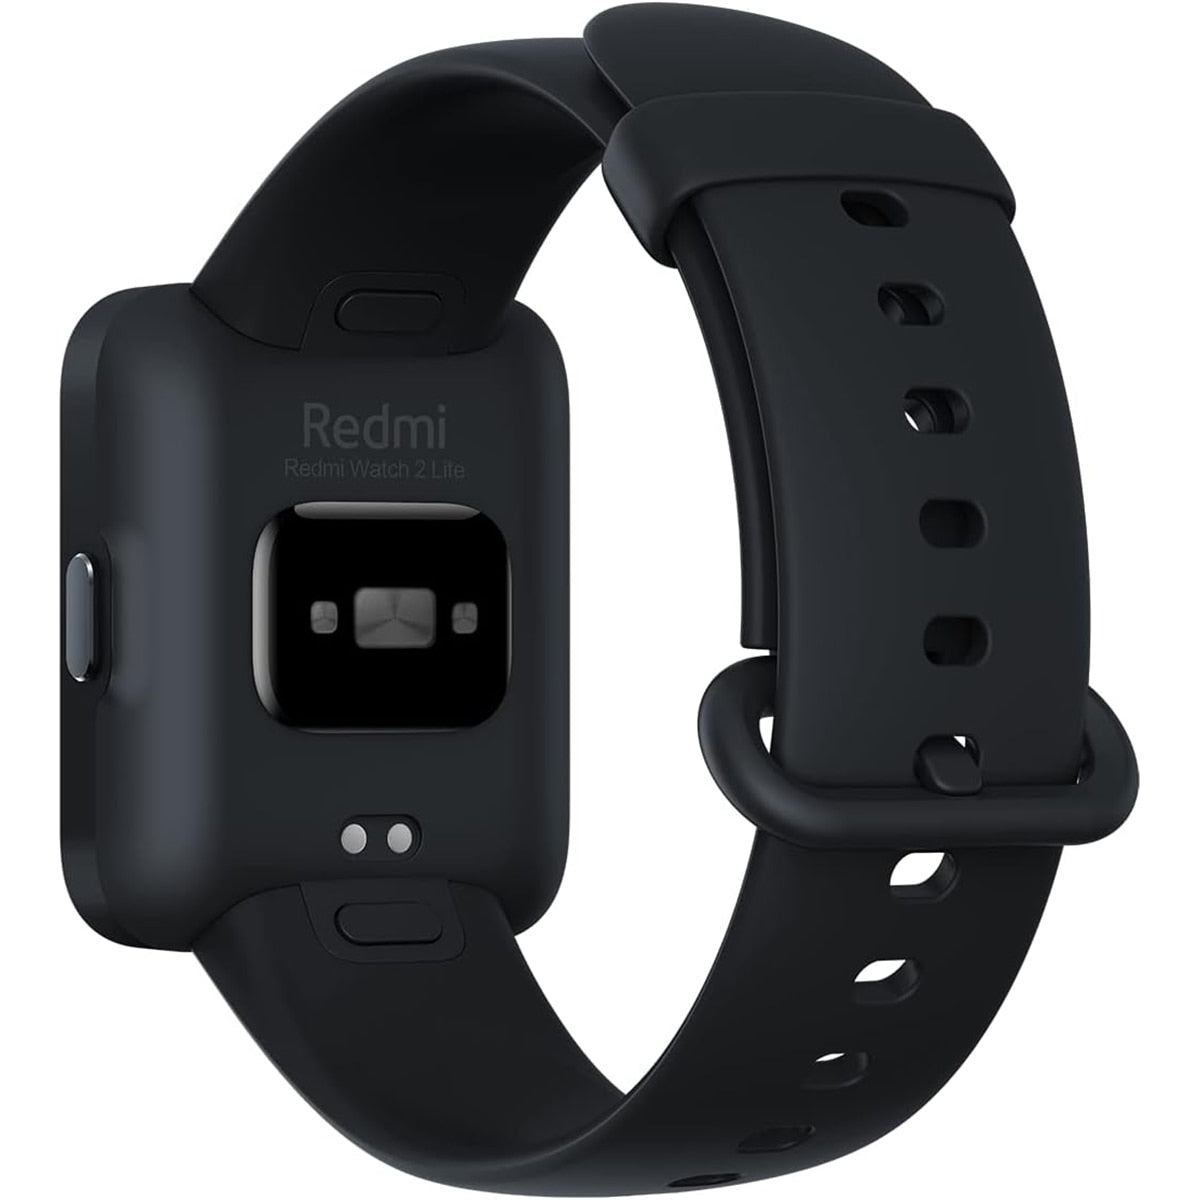 Original Xiaomi Redmi Watch 2 Lite, 100+ Fitness Modes, 1.55" Colorful Touch Display, 5 ATM Water Resistance, SPO₂ Measurement,